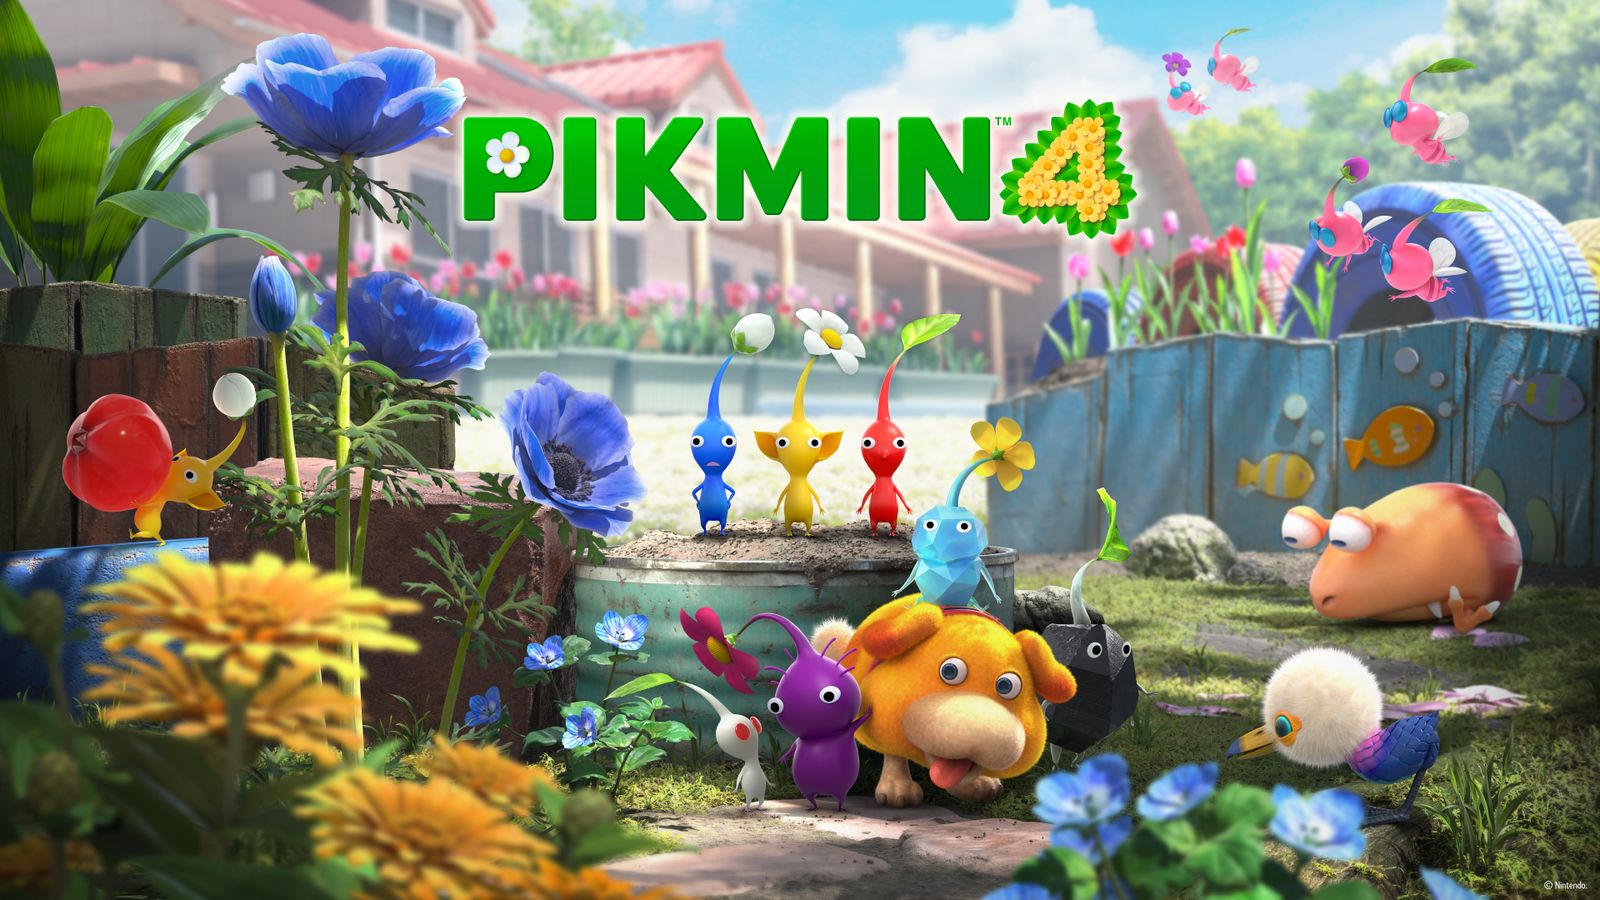 Pikmin 4 image featuring plenty of characters from the game